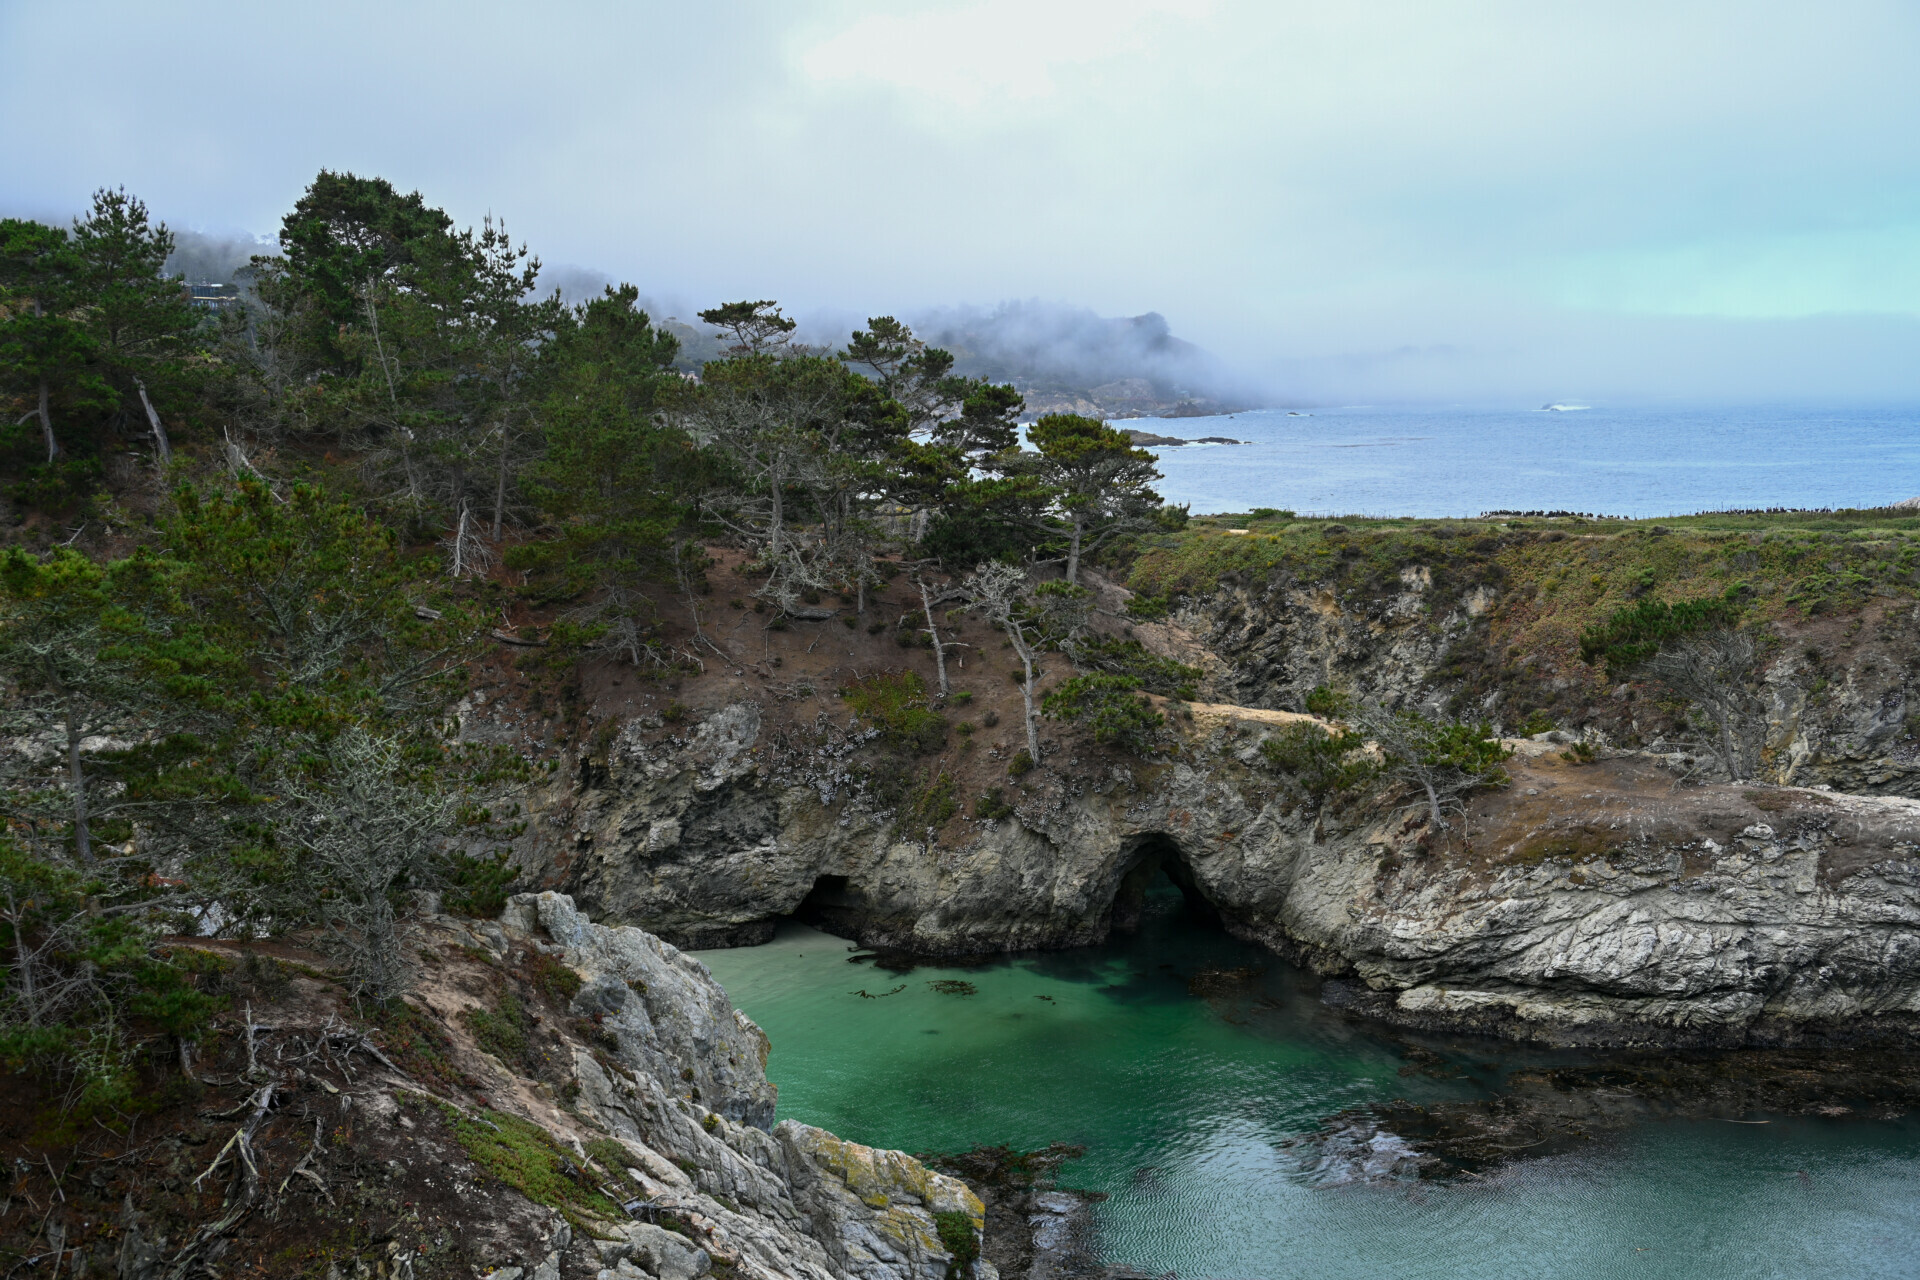 Emerald waters are in a secluded cove with a sea arch at McWay Falls, which is surrounded by cliffs and forest.